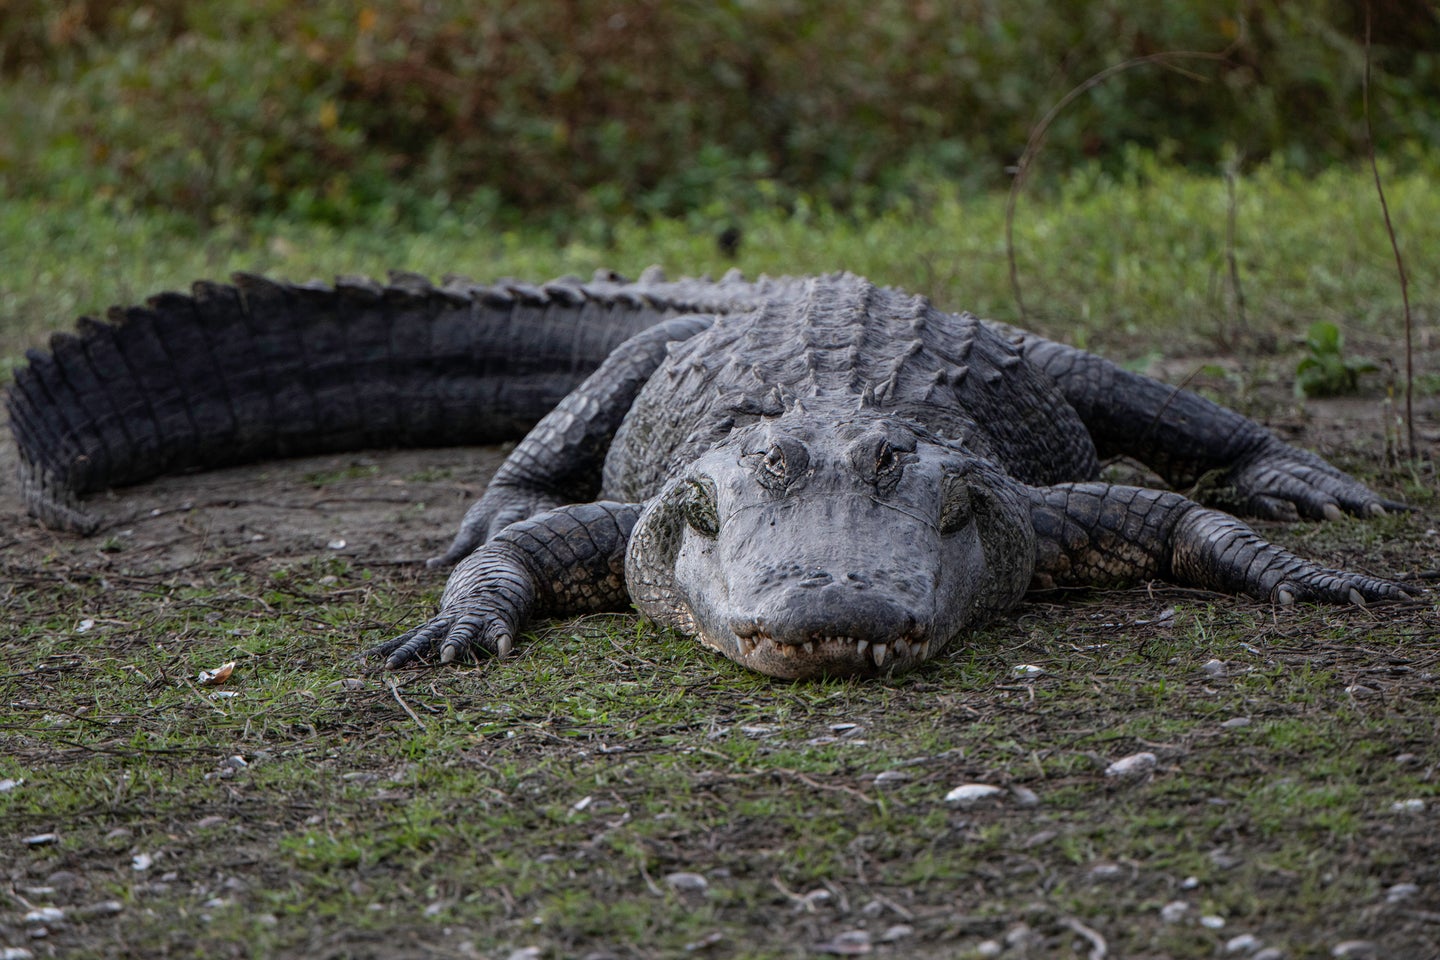 MEET THE ALLIGATOR- Cannibal If you've ever been to the park, you know our  boy, Cannibal. At 13' long and 800 lbs, he's our largest alligator at  the